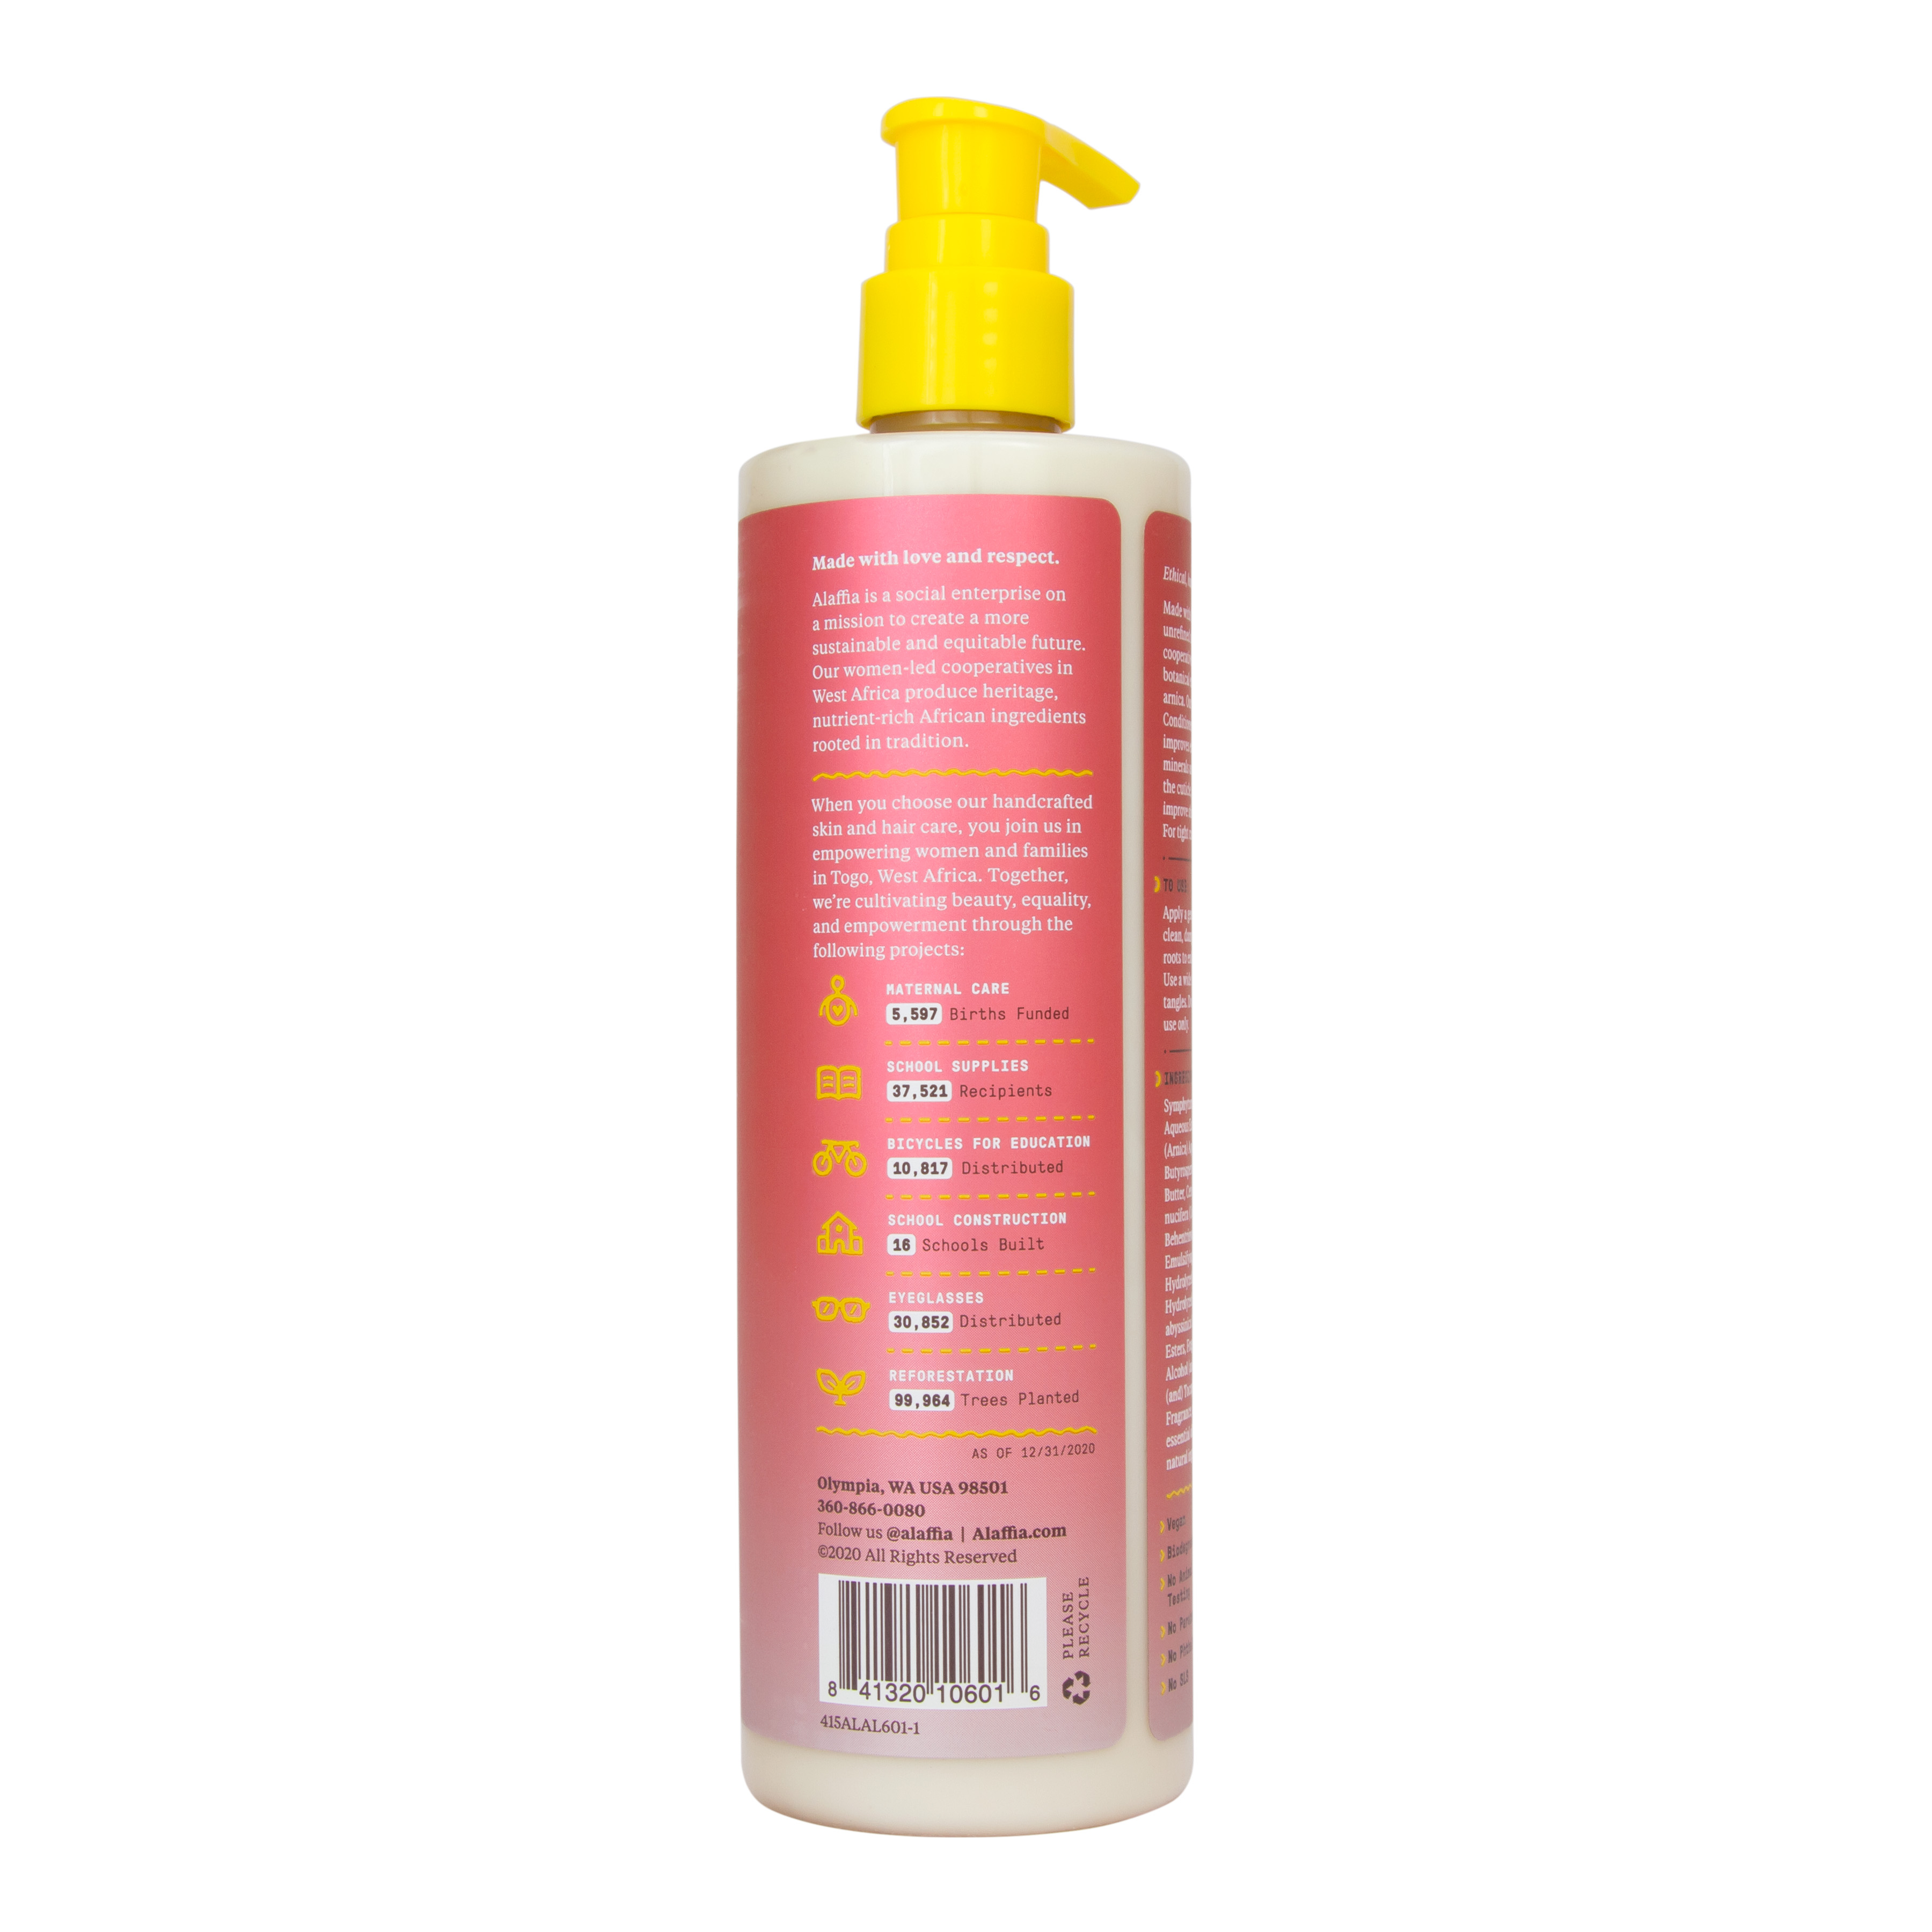 Alaffia Beautiful Curls Curl Define Leave-in Conditioner with Shea Butter, 12 fl oz - image 5 of 8